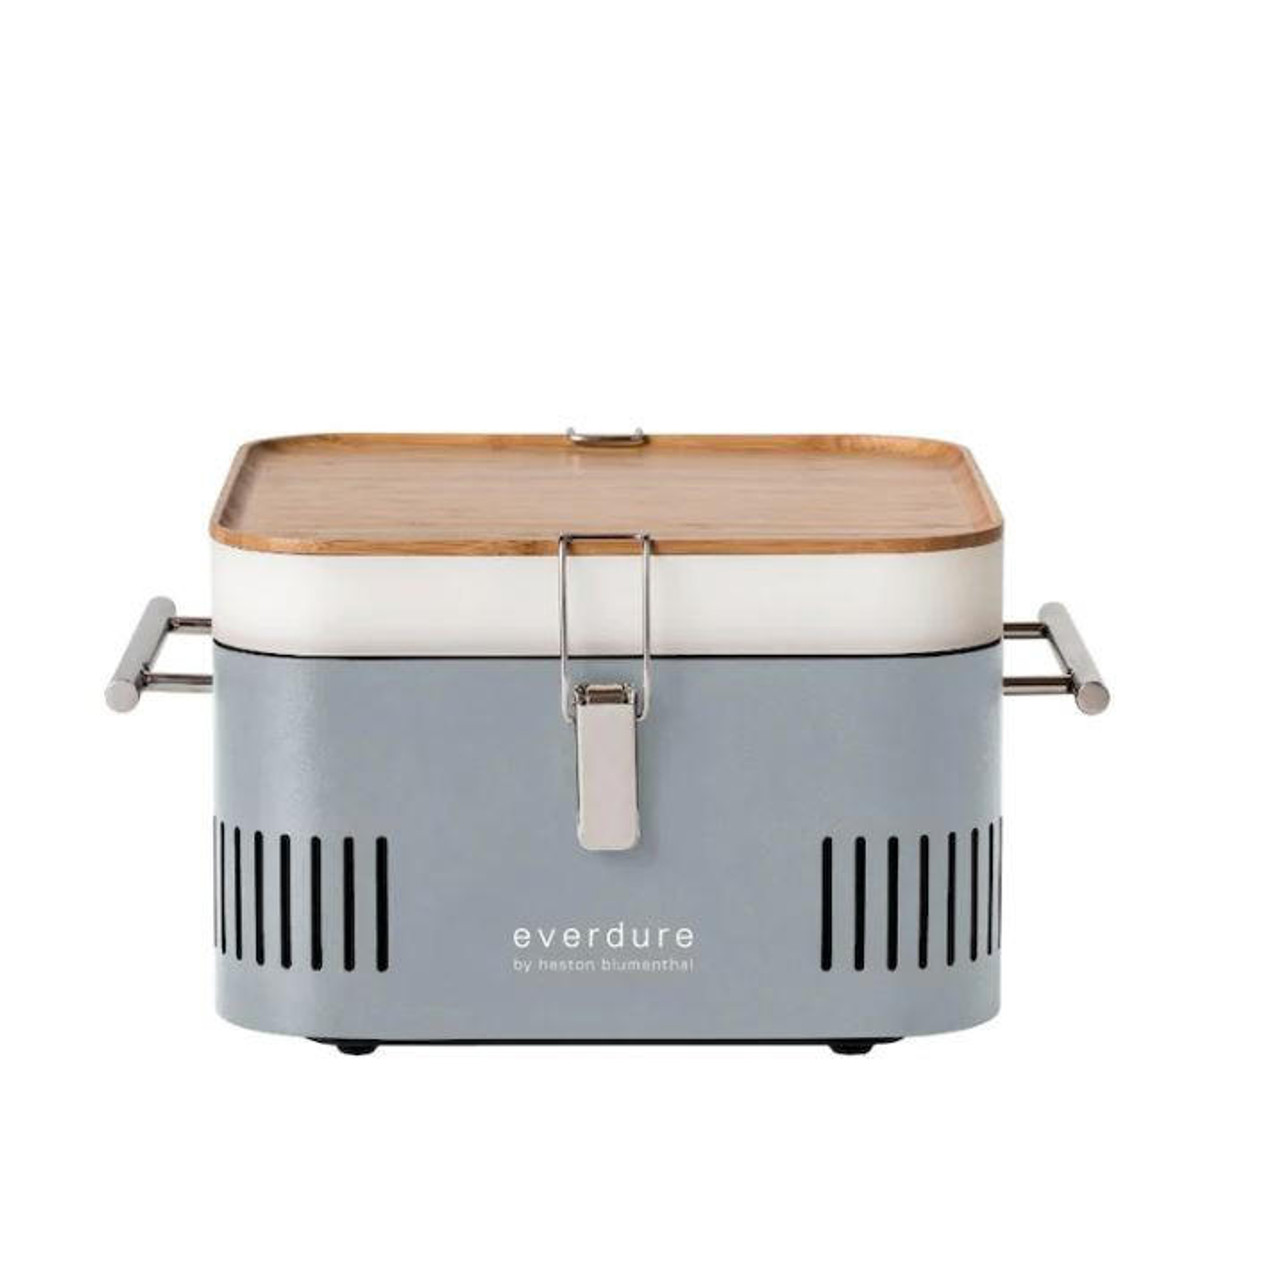 Everdure Cube by Heston Blumenthal Portable Charcoal Barbeque Grill, Gray